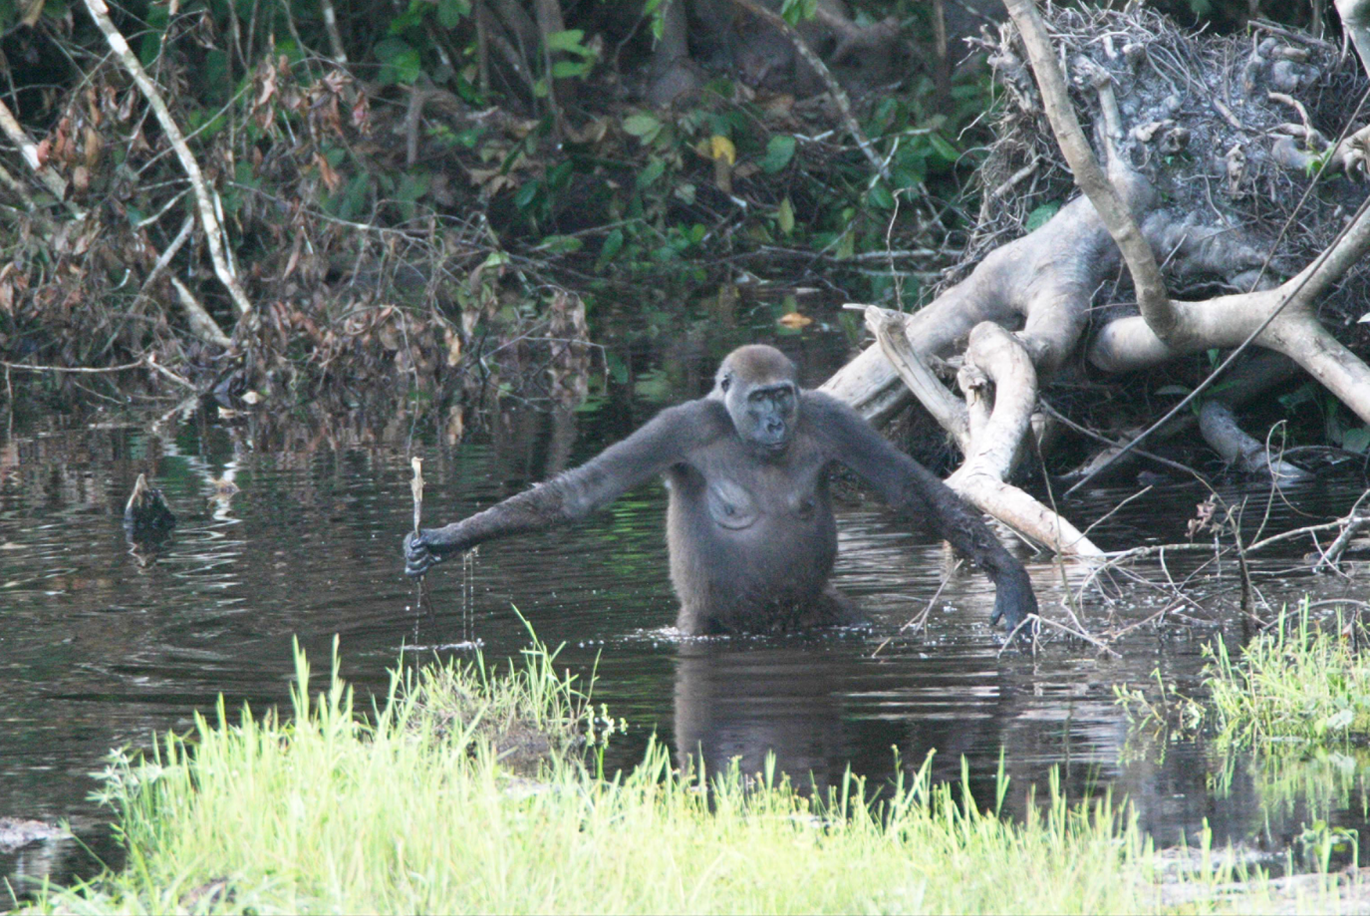 This adult female Western lowland gorilla in Nouabalé-Ndoki National Park, northern Congo, uses a branch as a walking stick to gauge the water's depth. Image credit: © 2005 Public Library of Science